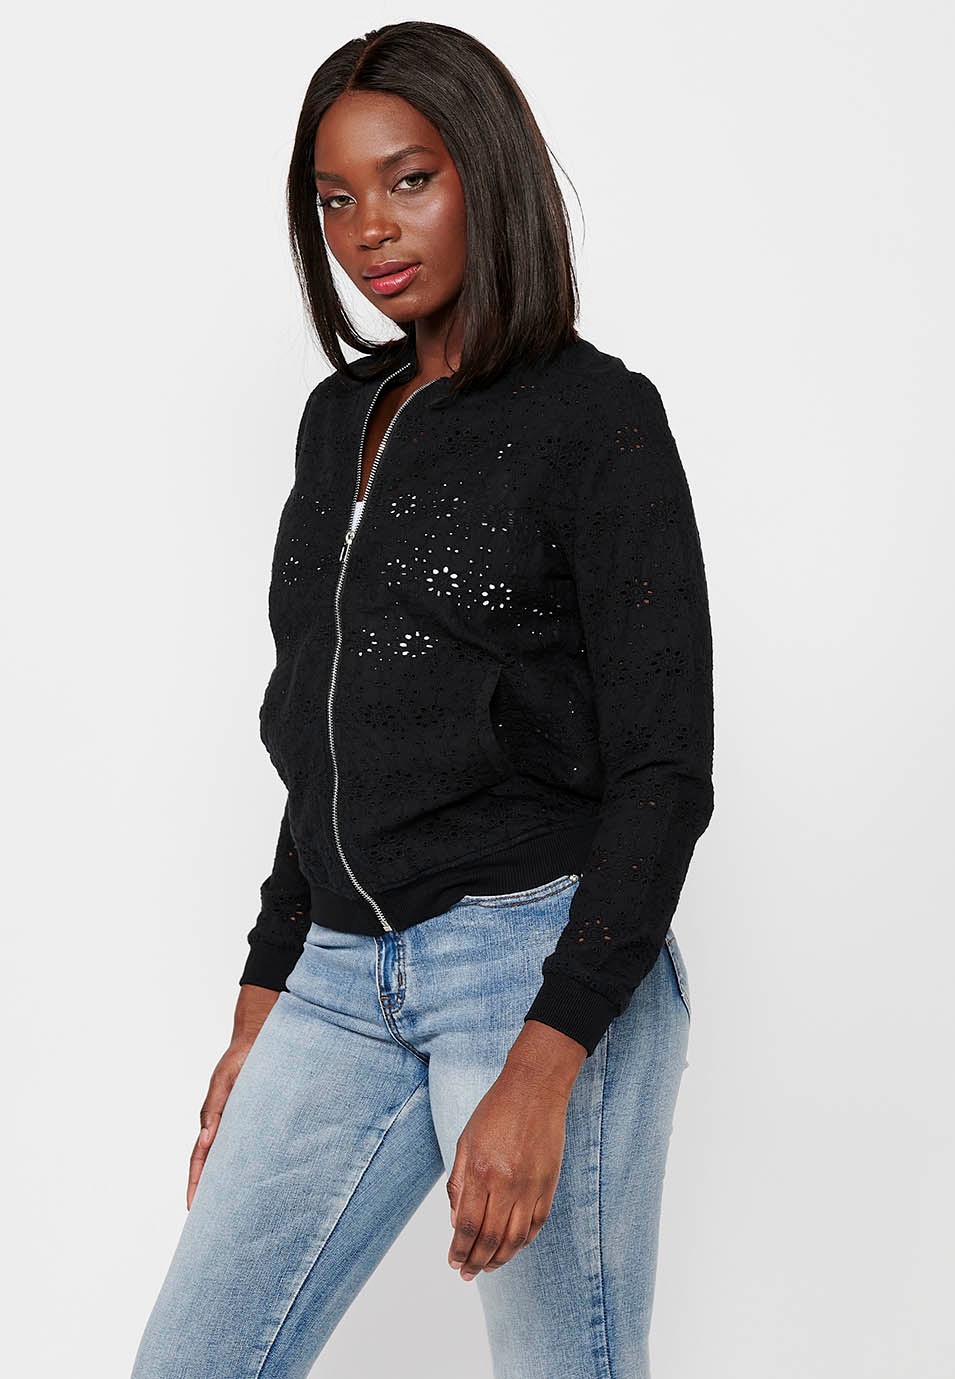 Cotton Sweatshirt with Zipper Front Closure and Rib Finishes with Embroidered Fabric with Floral Motifs and Black Round Neck for Women 5